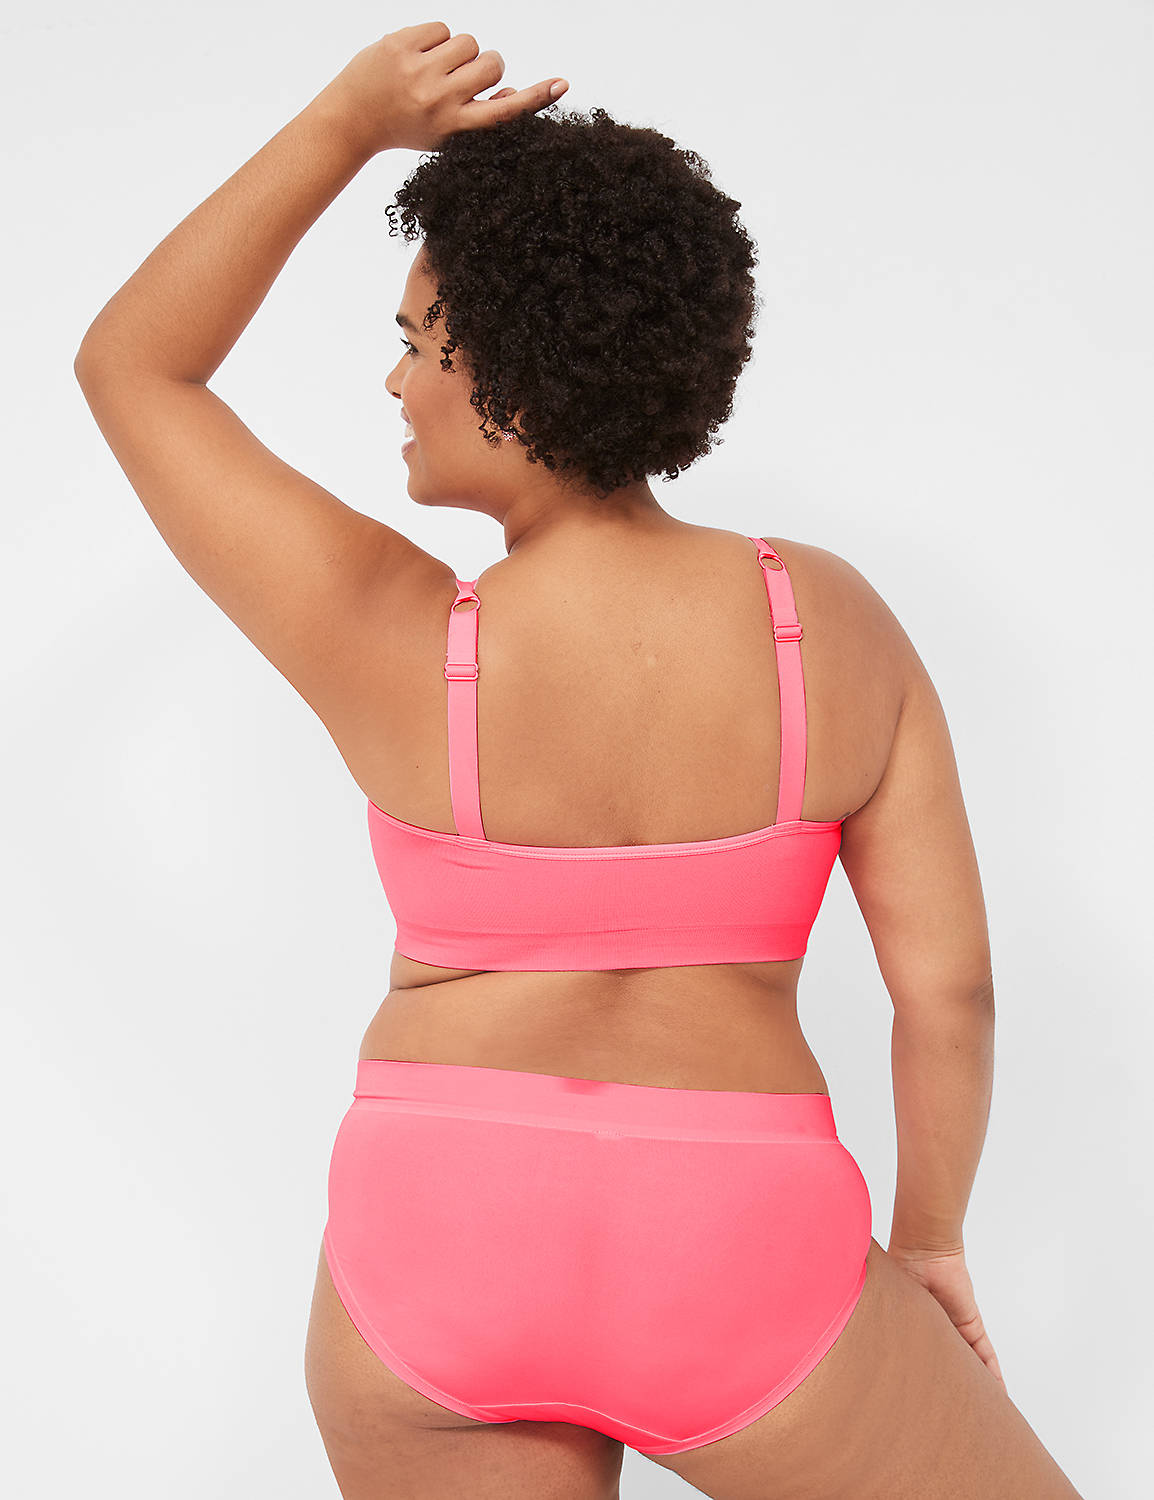 Strappy Seamless Bralette 1138675-S Product Image 2